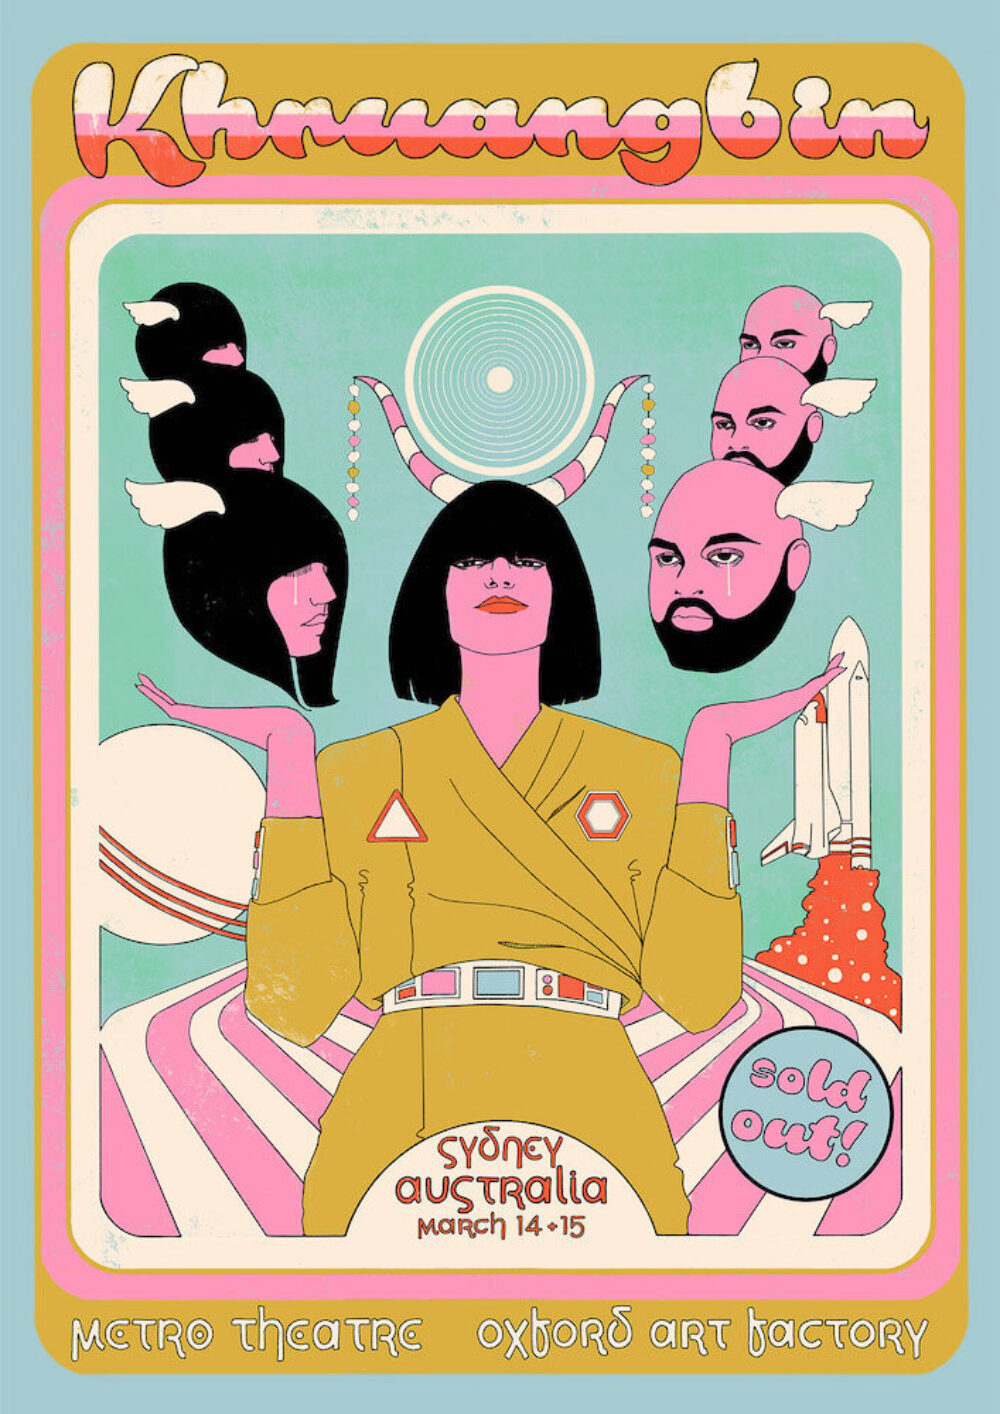 Limited edition Khruangbin poster from their sold out Sydney Australia shows